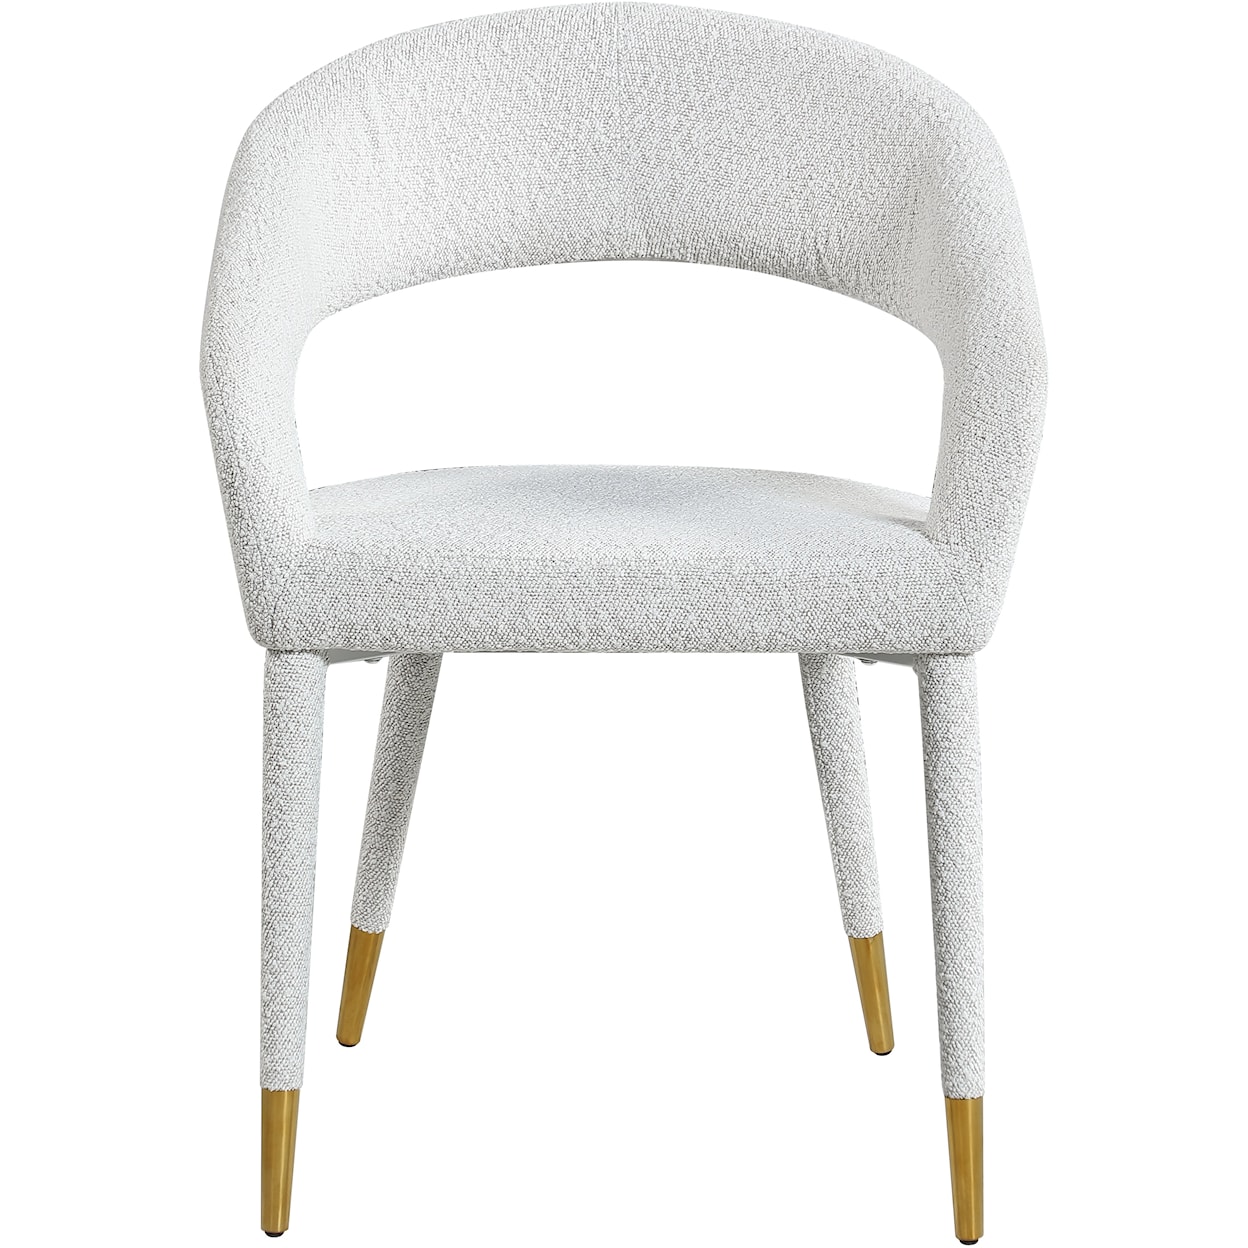 Meridian Furniture Destiny Upholstered Cream Boucle Fabric Dining Chair